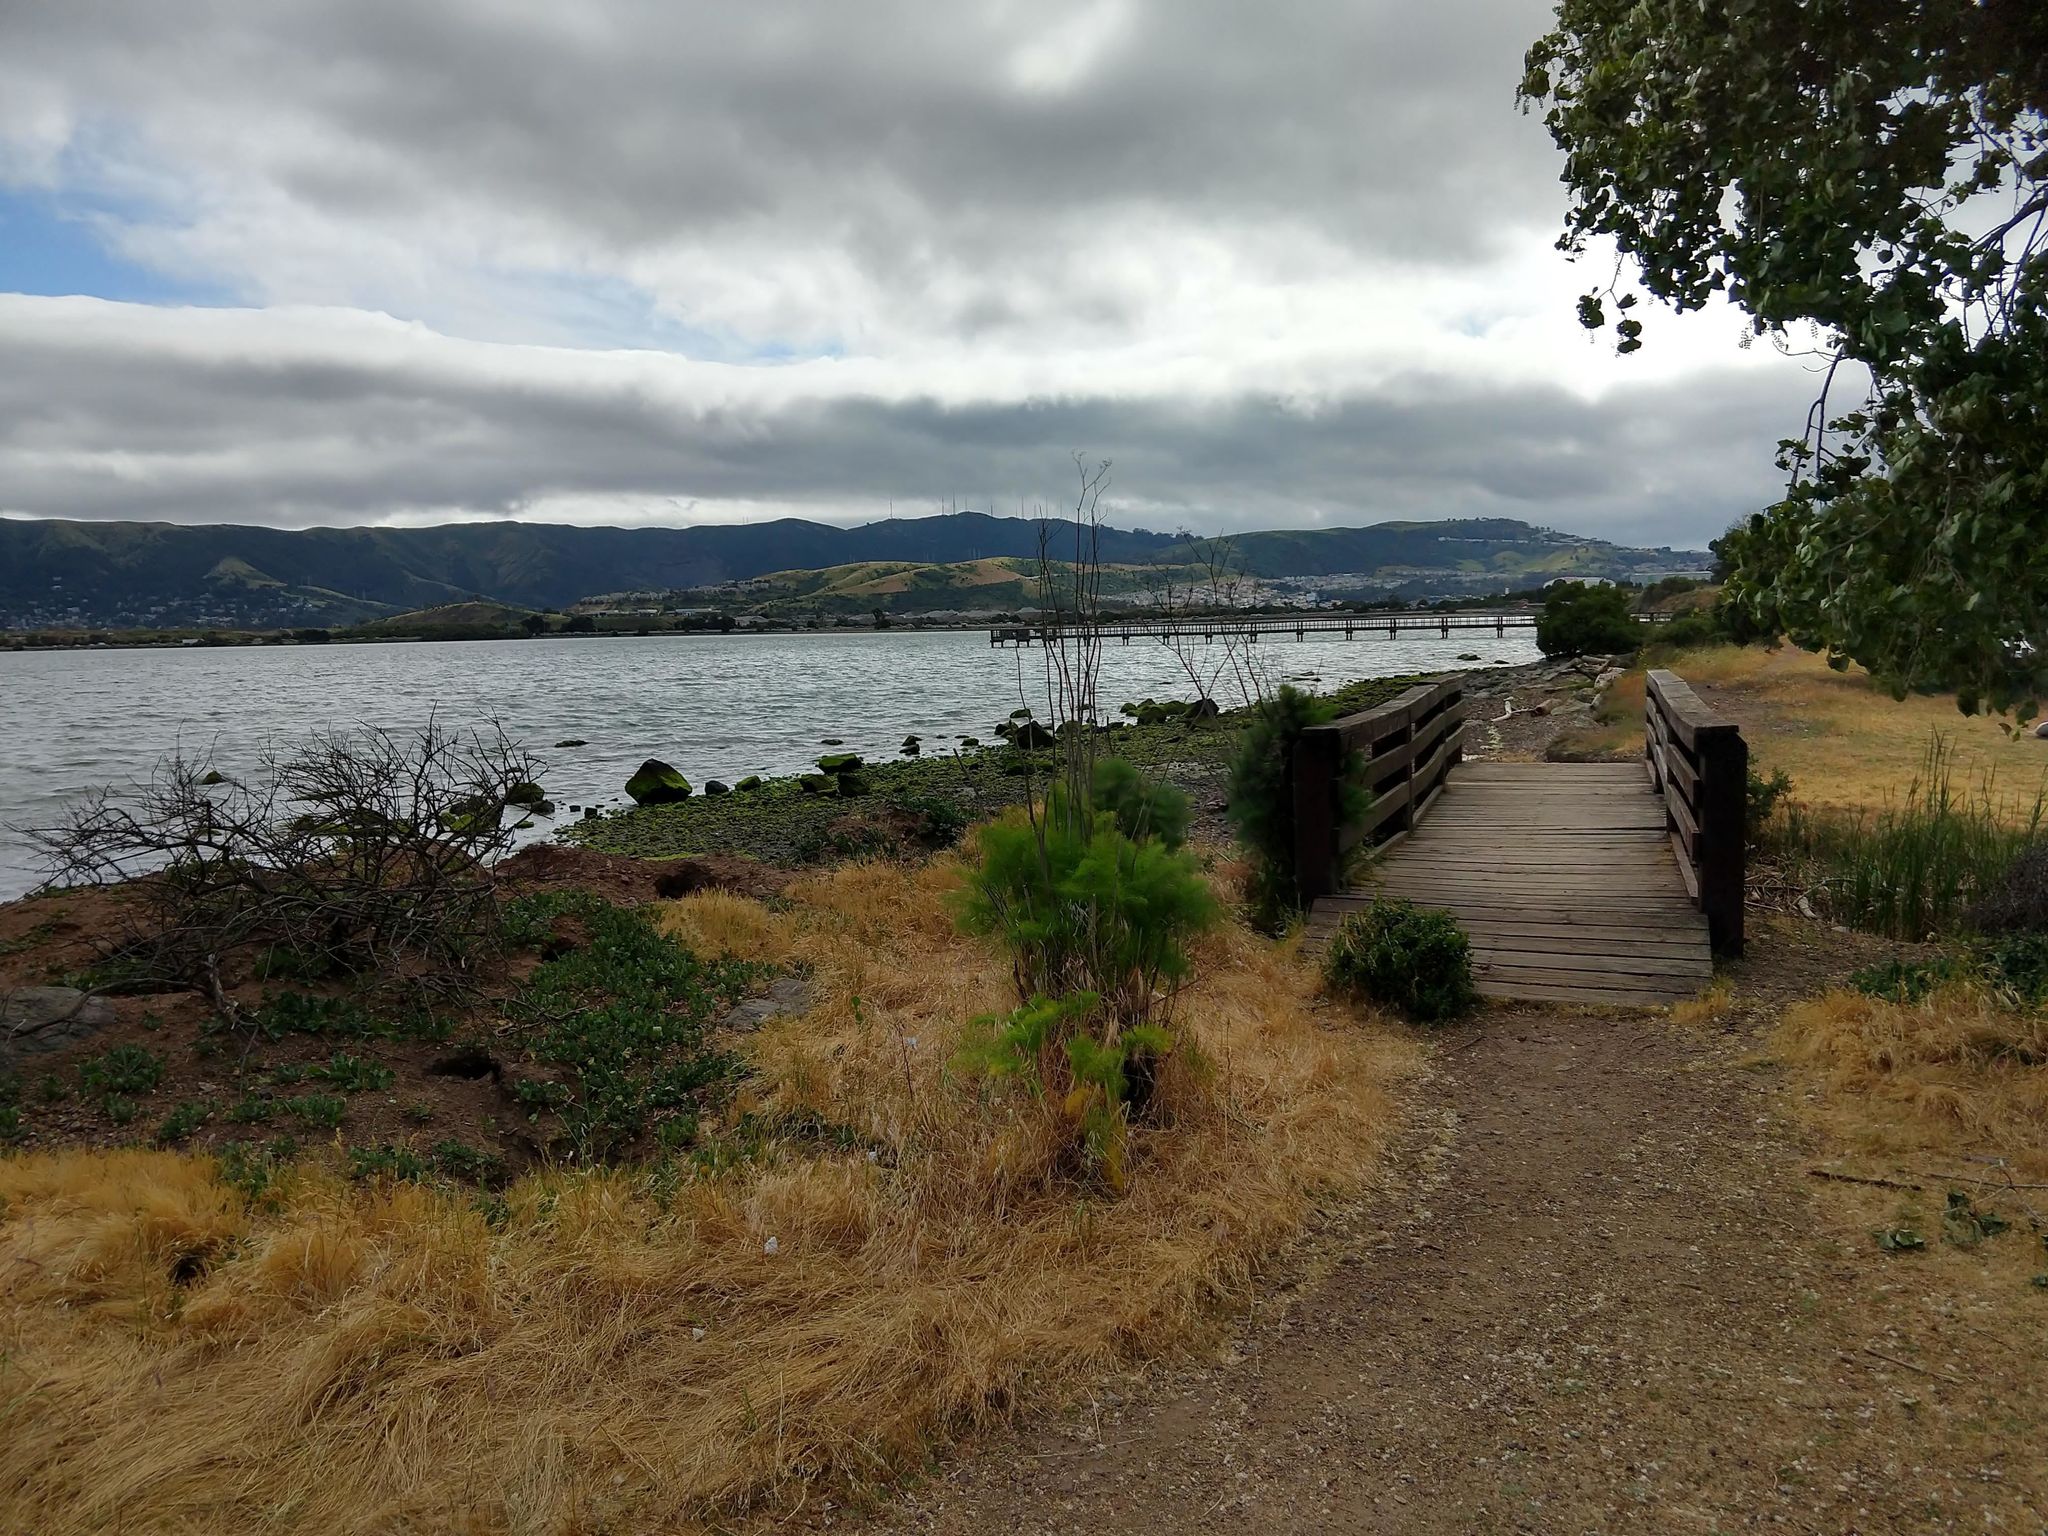 Trail between Candlestick Point and Last Port picnic area (2019), with old fishing pier and San Bruno Mountain beyond.